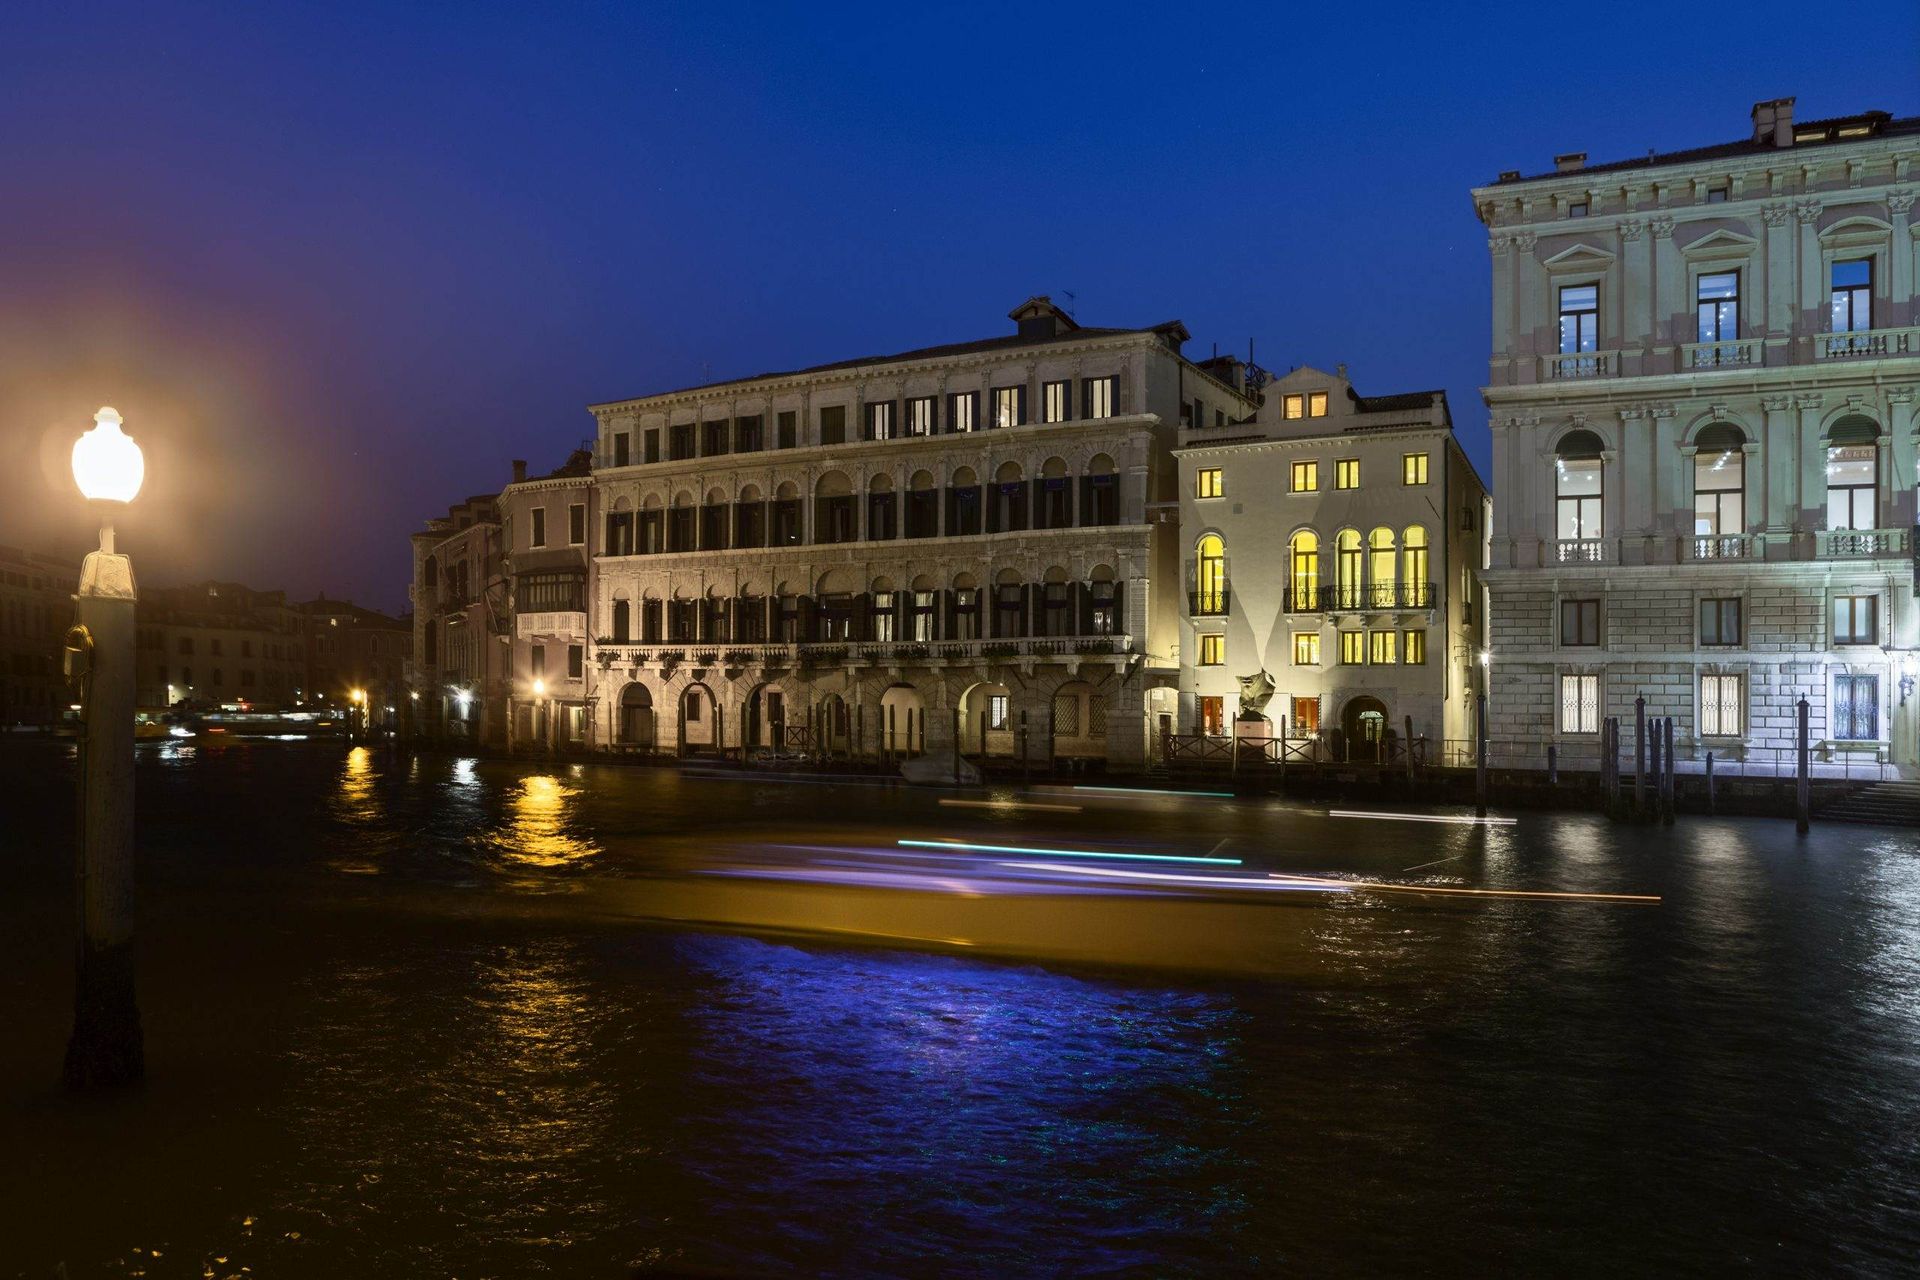 Discover “Dinner on Board” and enjoy Venice with an amazing experience by Palazzina Grassi.